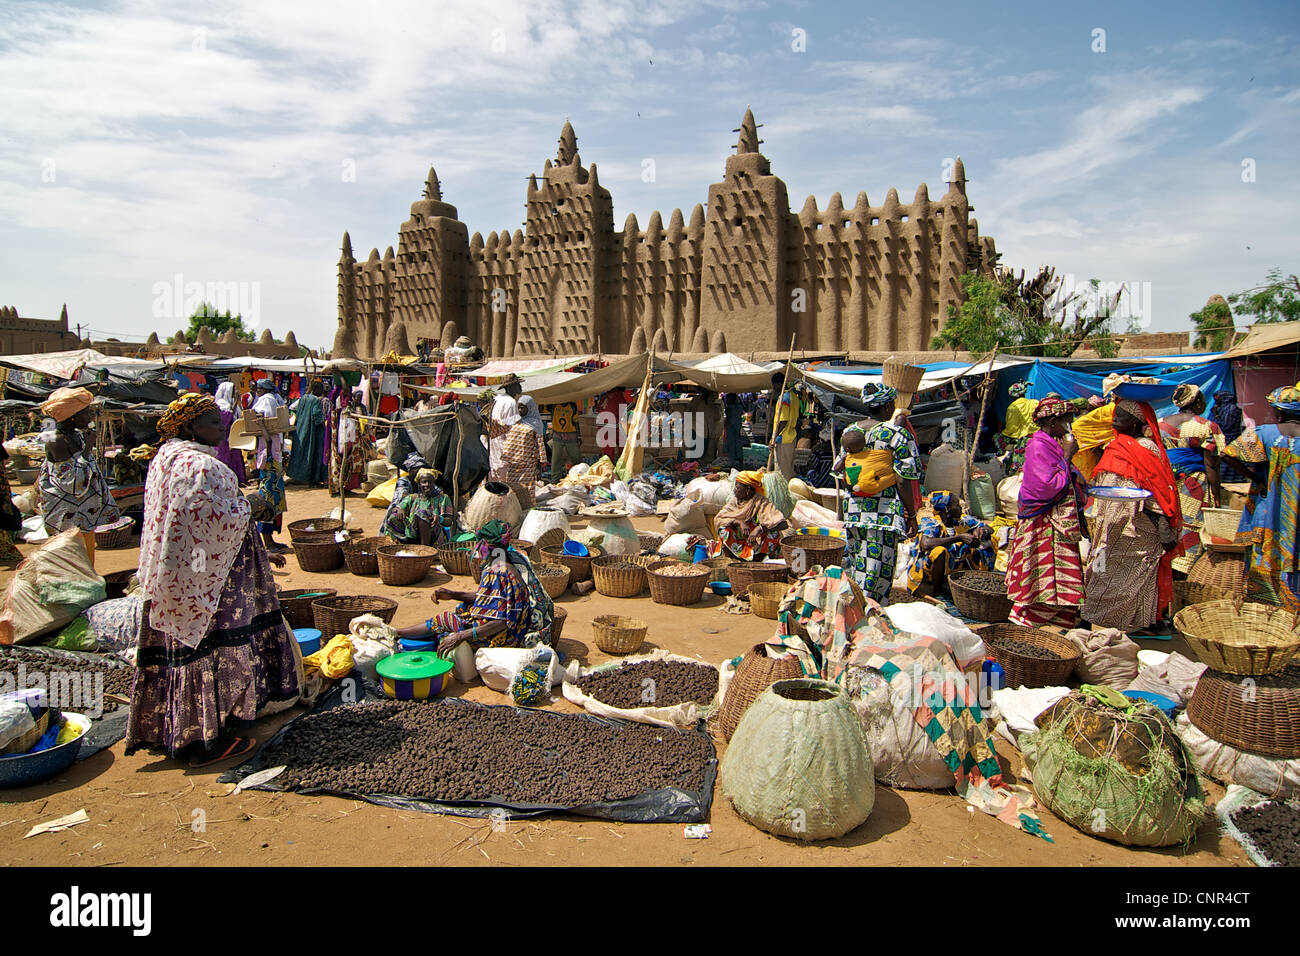 A marketplace in front of the Great Mosque of Djenne in Djenne, Mali. Stock Photo